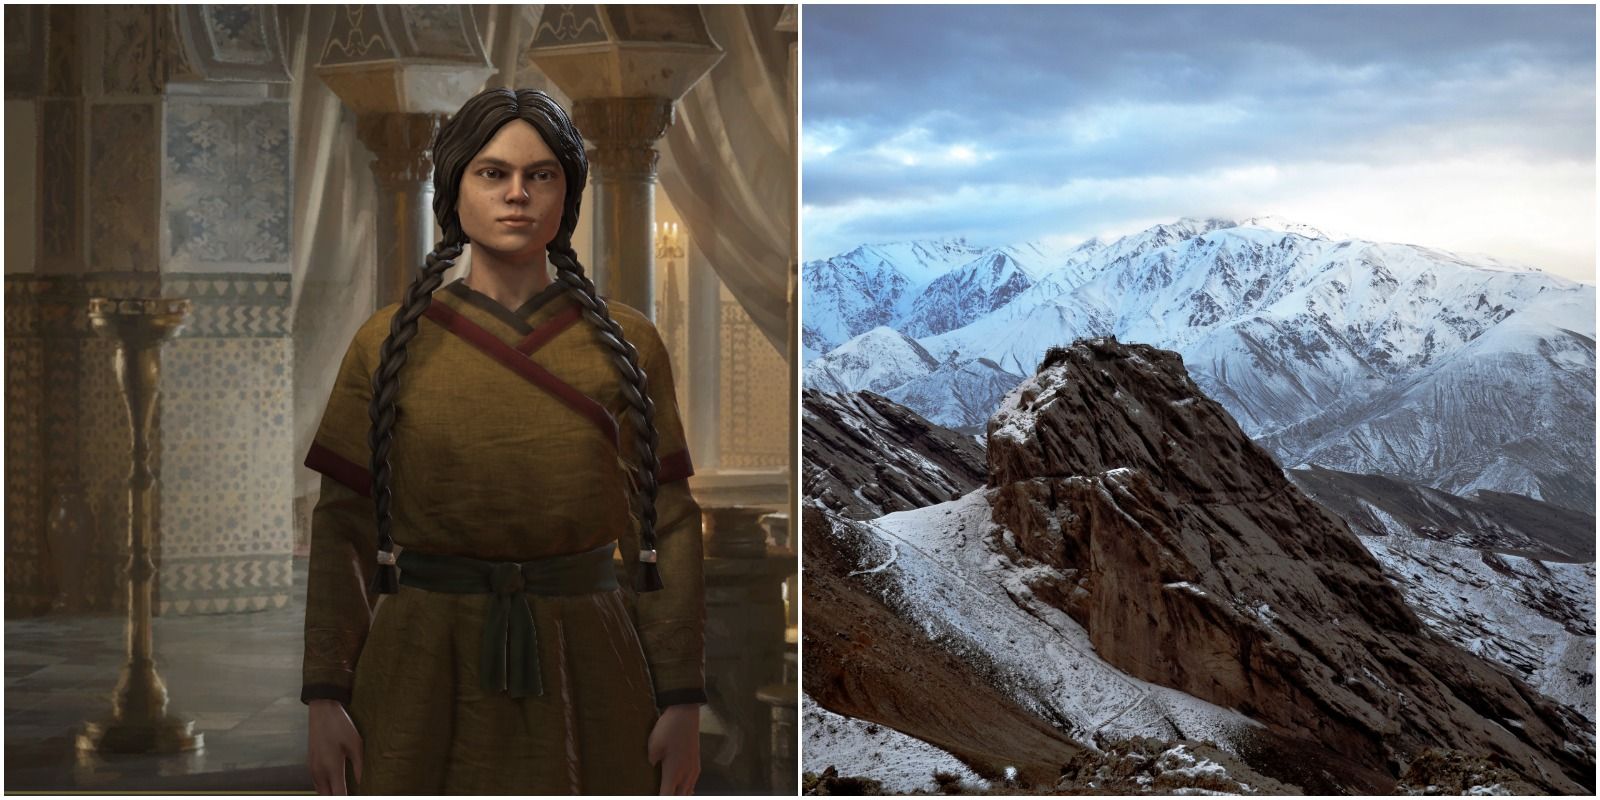 Daylamite Culture: Mountaintop Fortress and Woman in CK3